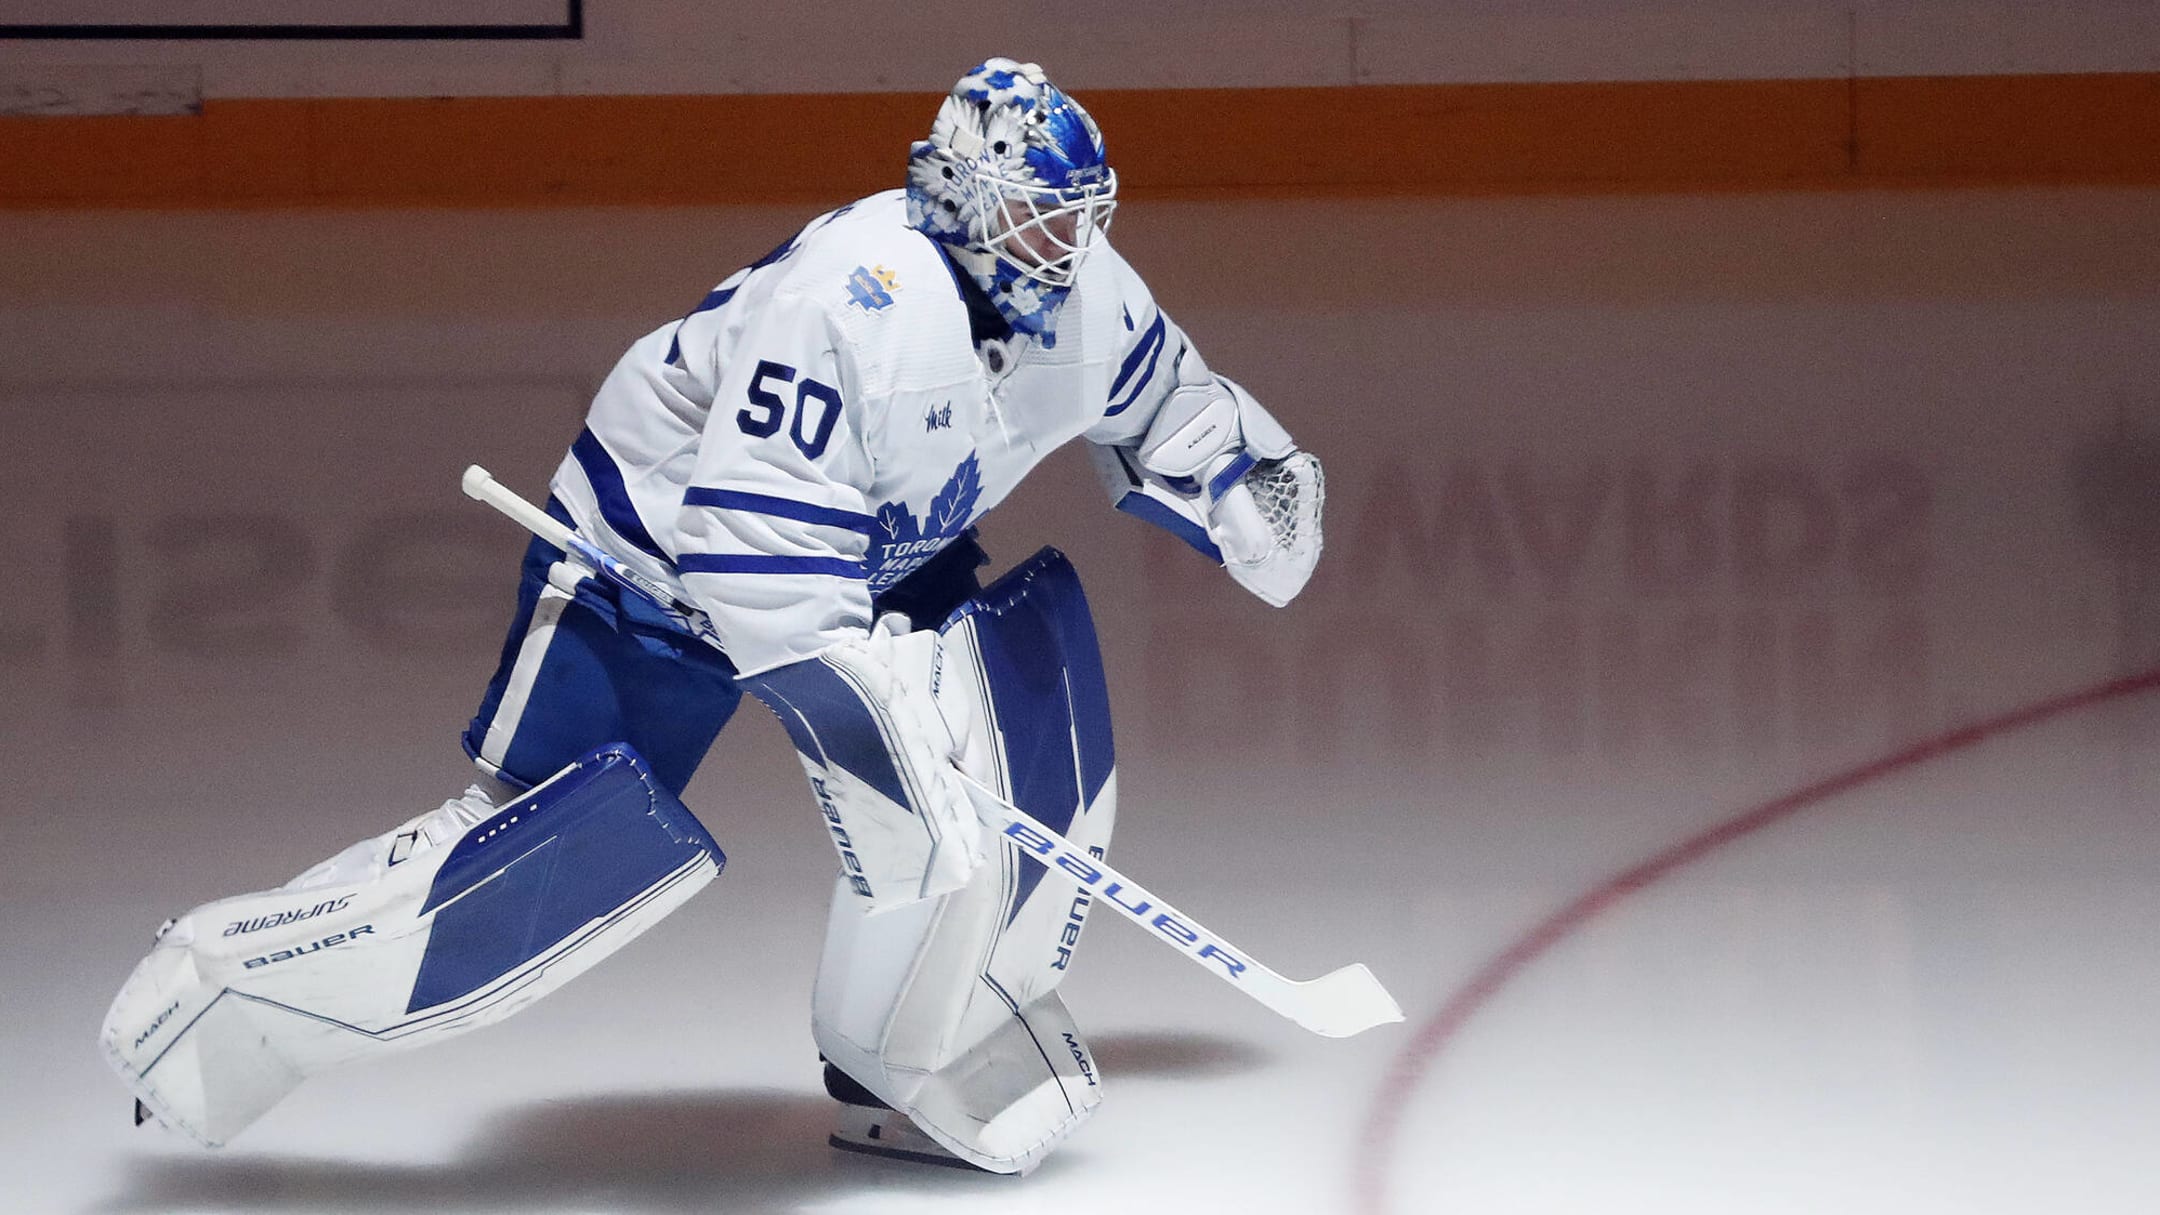 Toronto Marlies To Face Utica Comets in North Division Semifinals